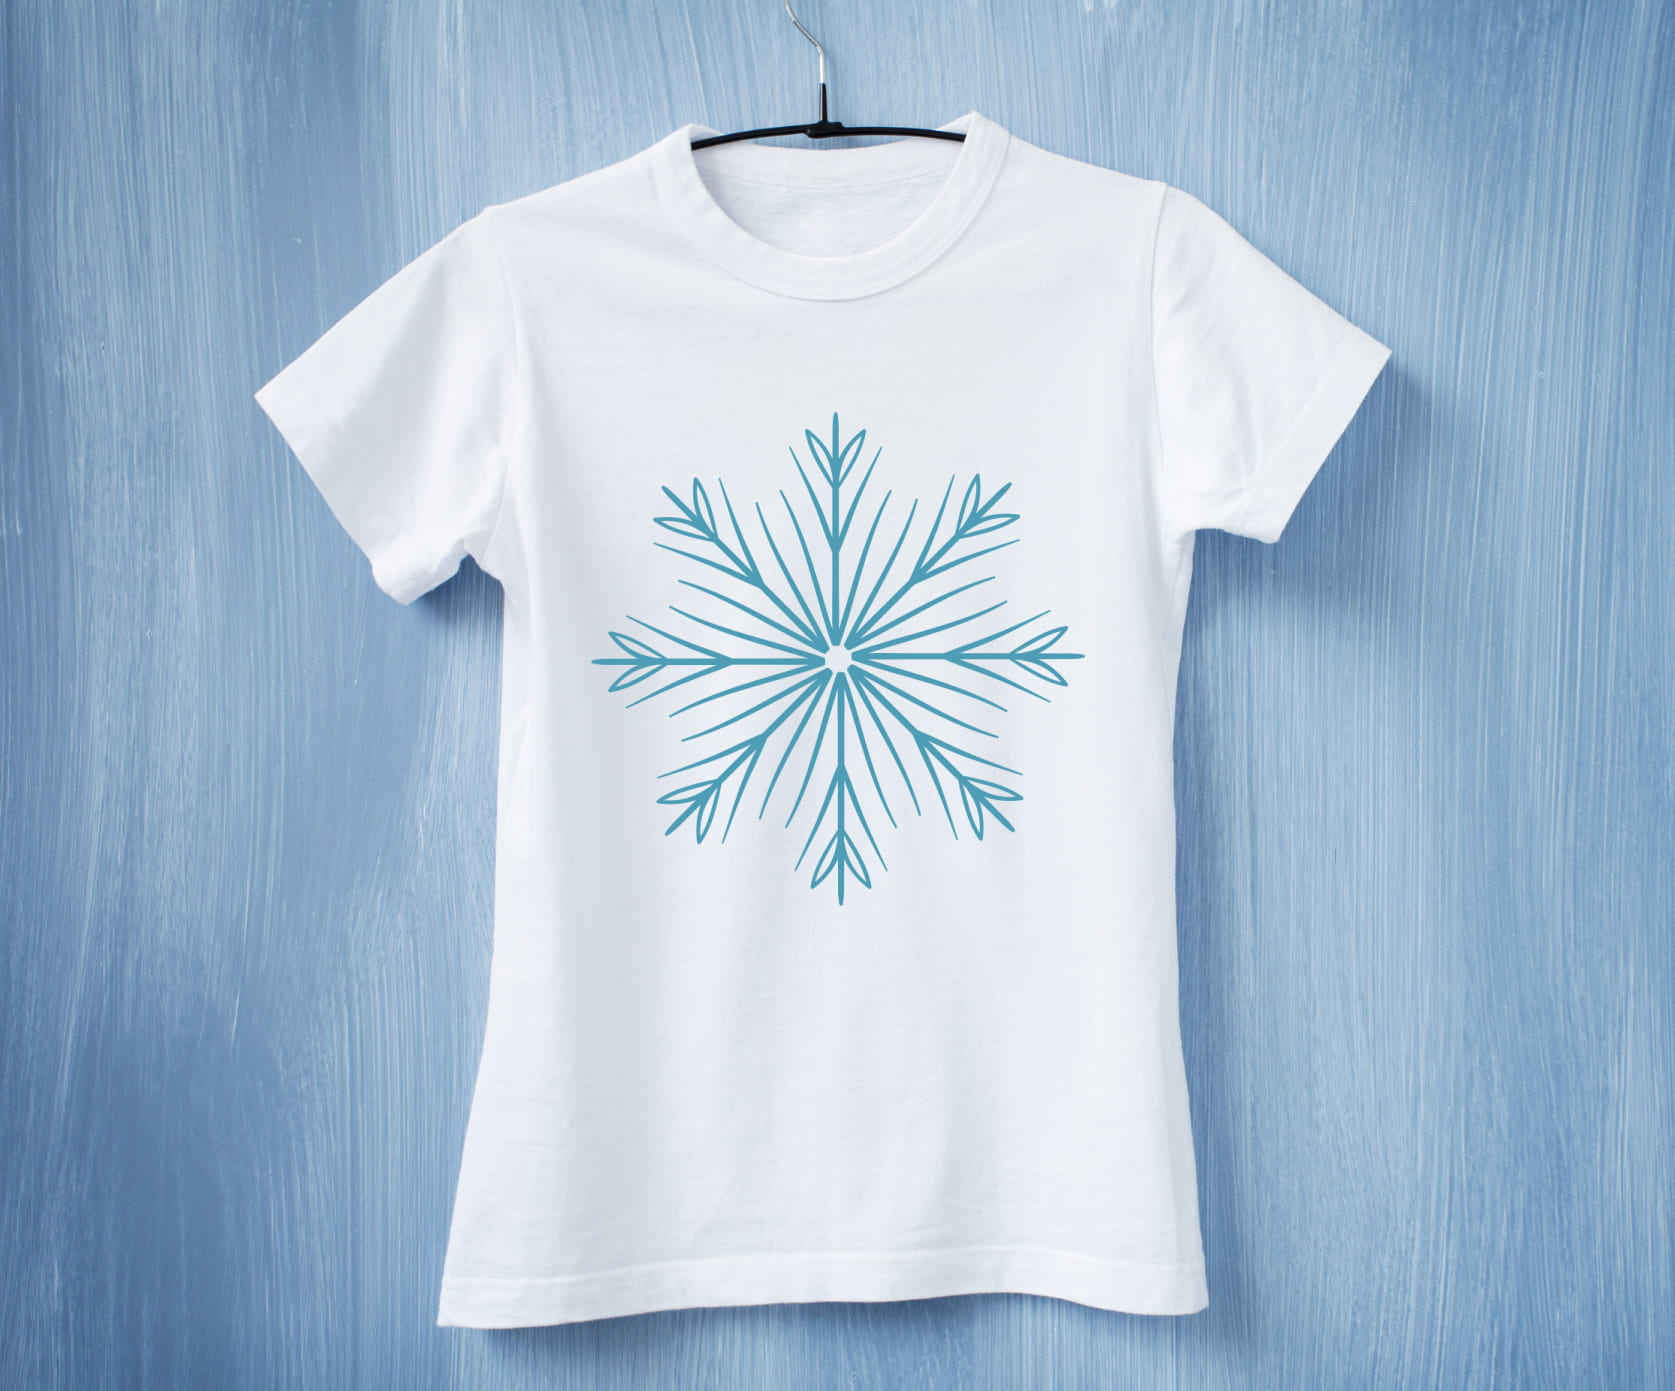 Delicate snowflake ornament on a white t-shirt.